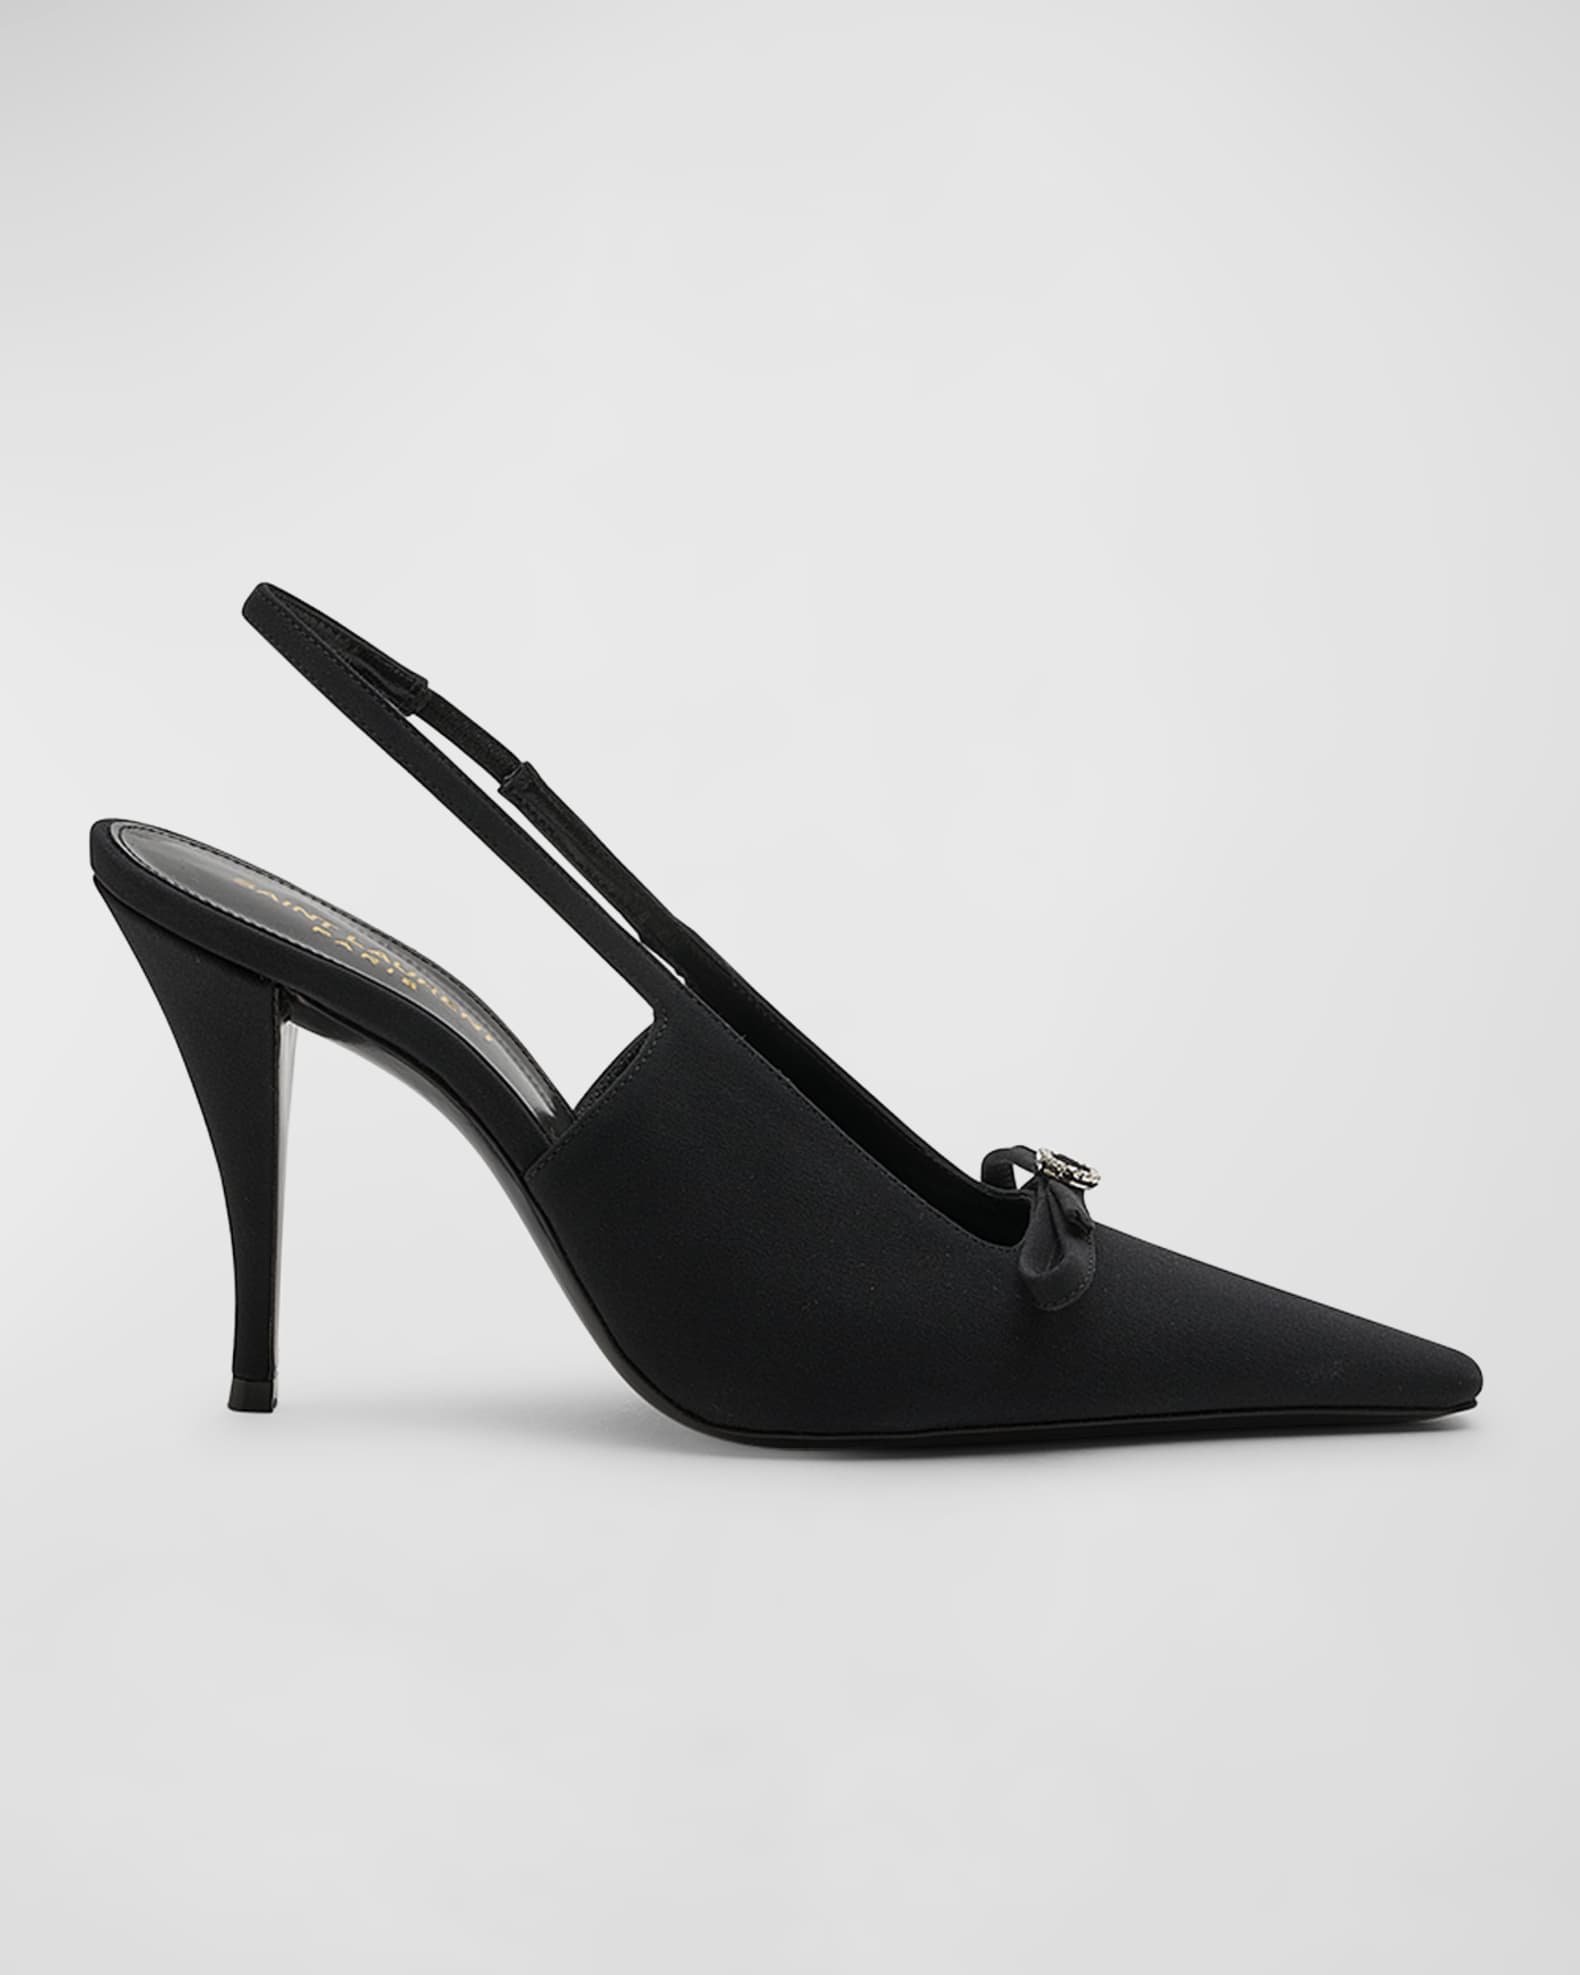 Introducing Chanel's Slingback Stories